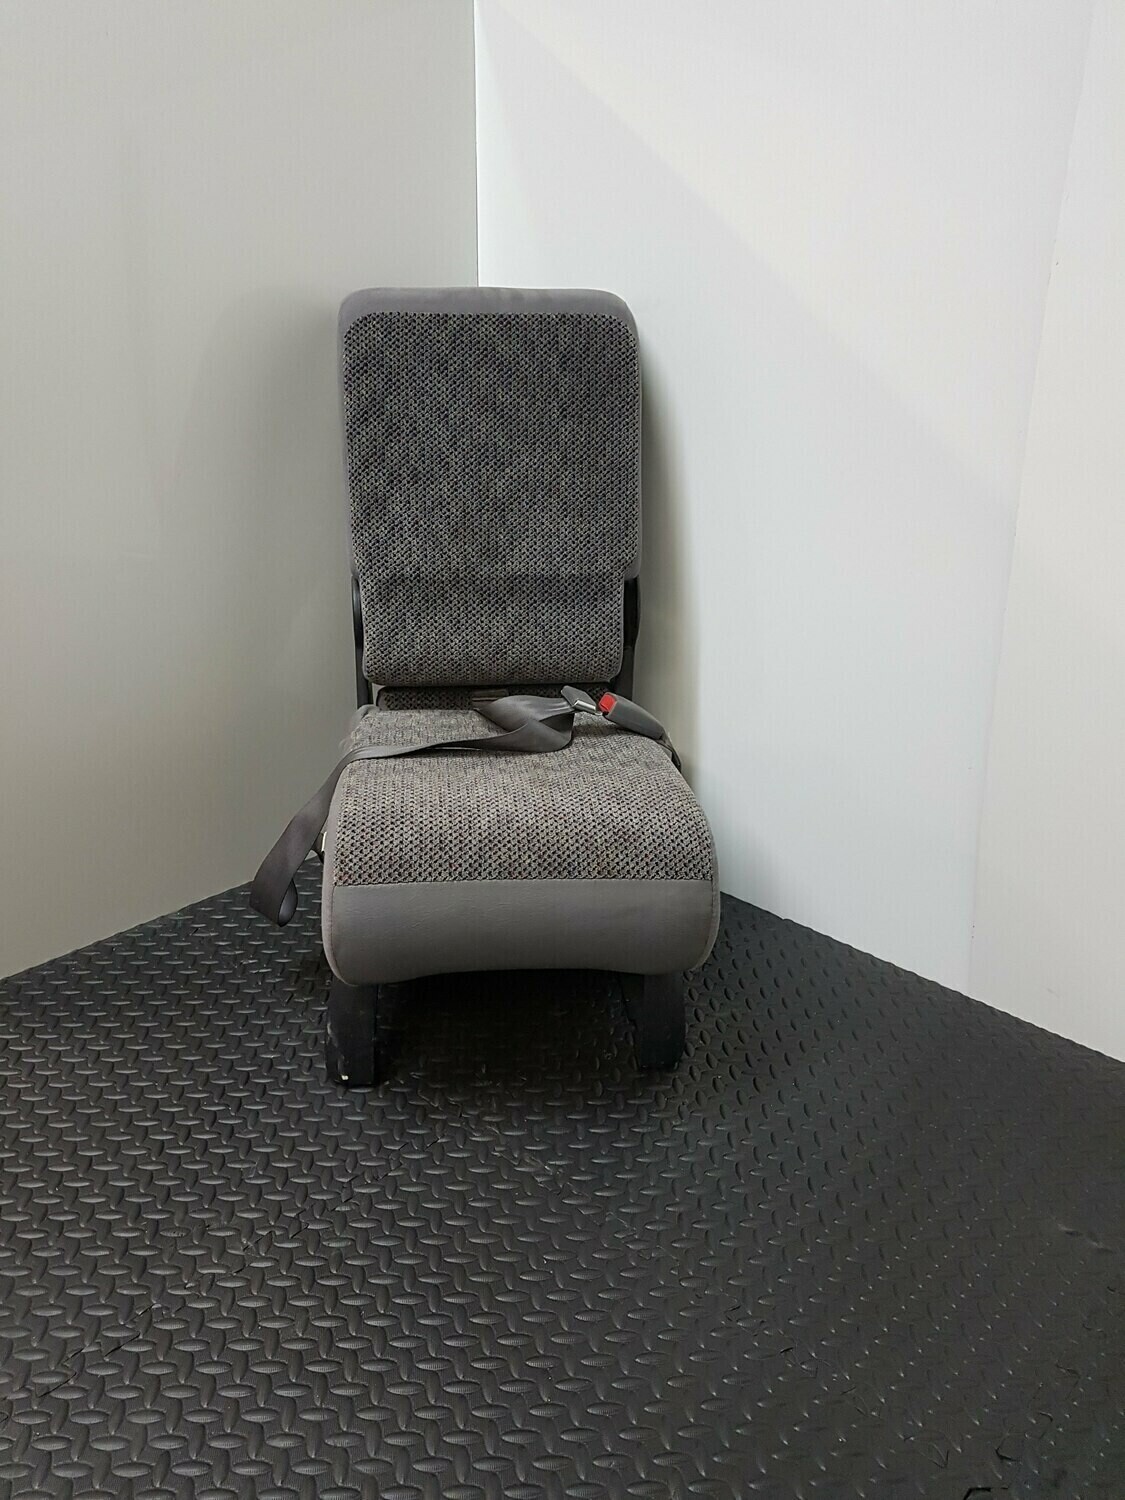 Centre Seat for Chevy & Ford Econoline Cargo Vans